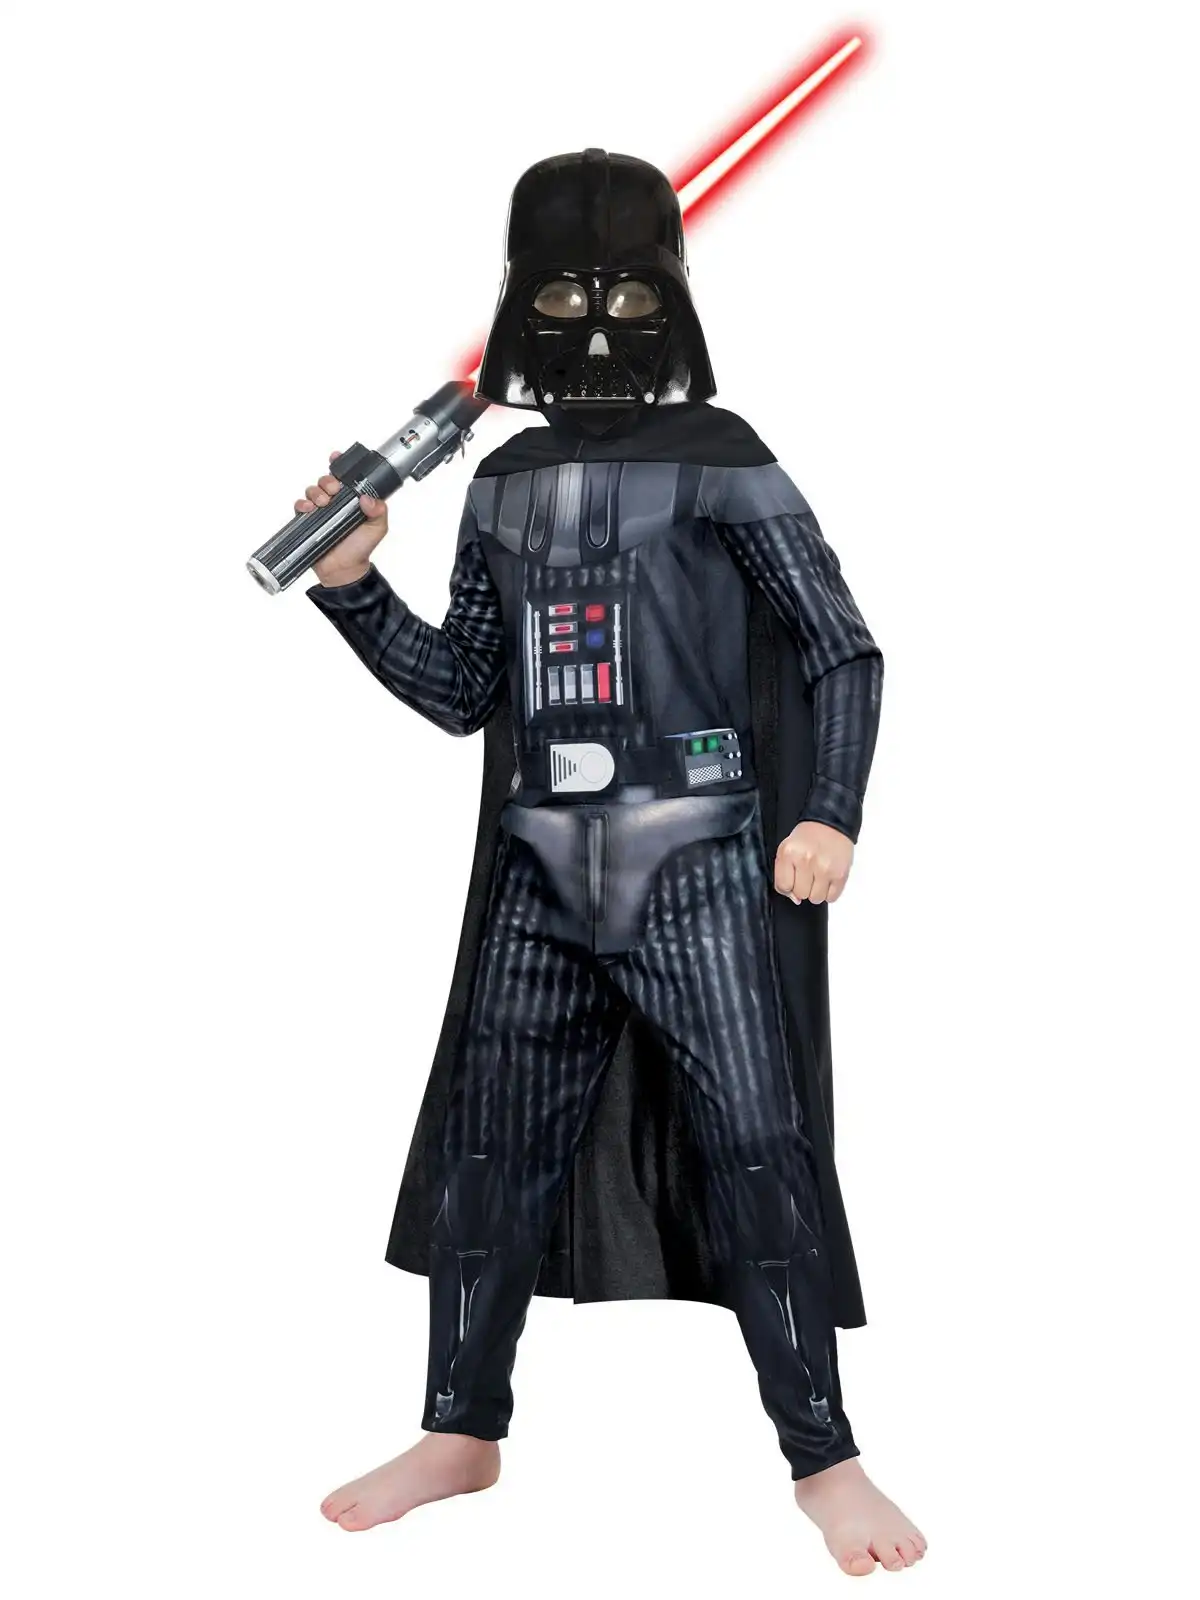 Star Wars Darth Vader Classic Dress Up Party Costume Kids/Boys/Children Size 3-5